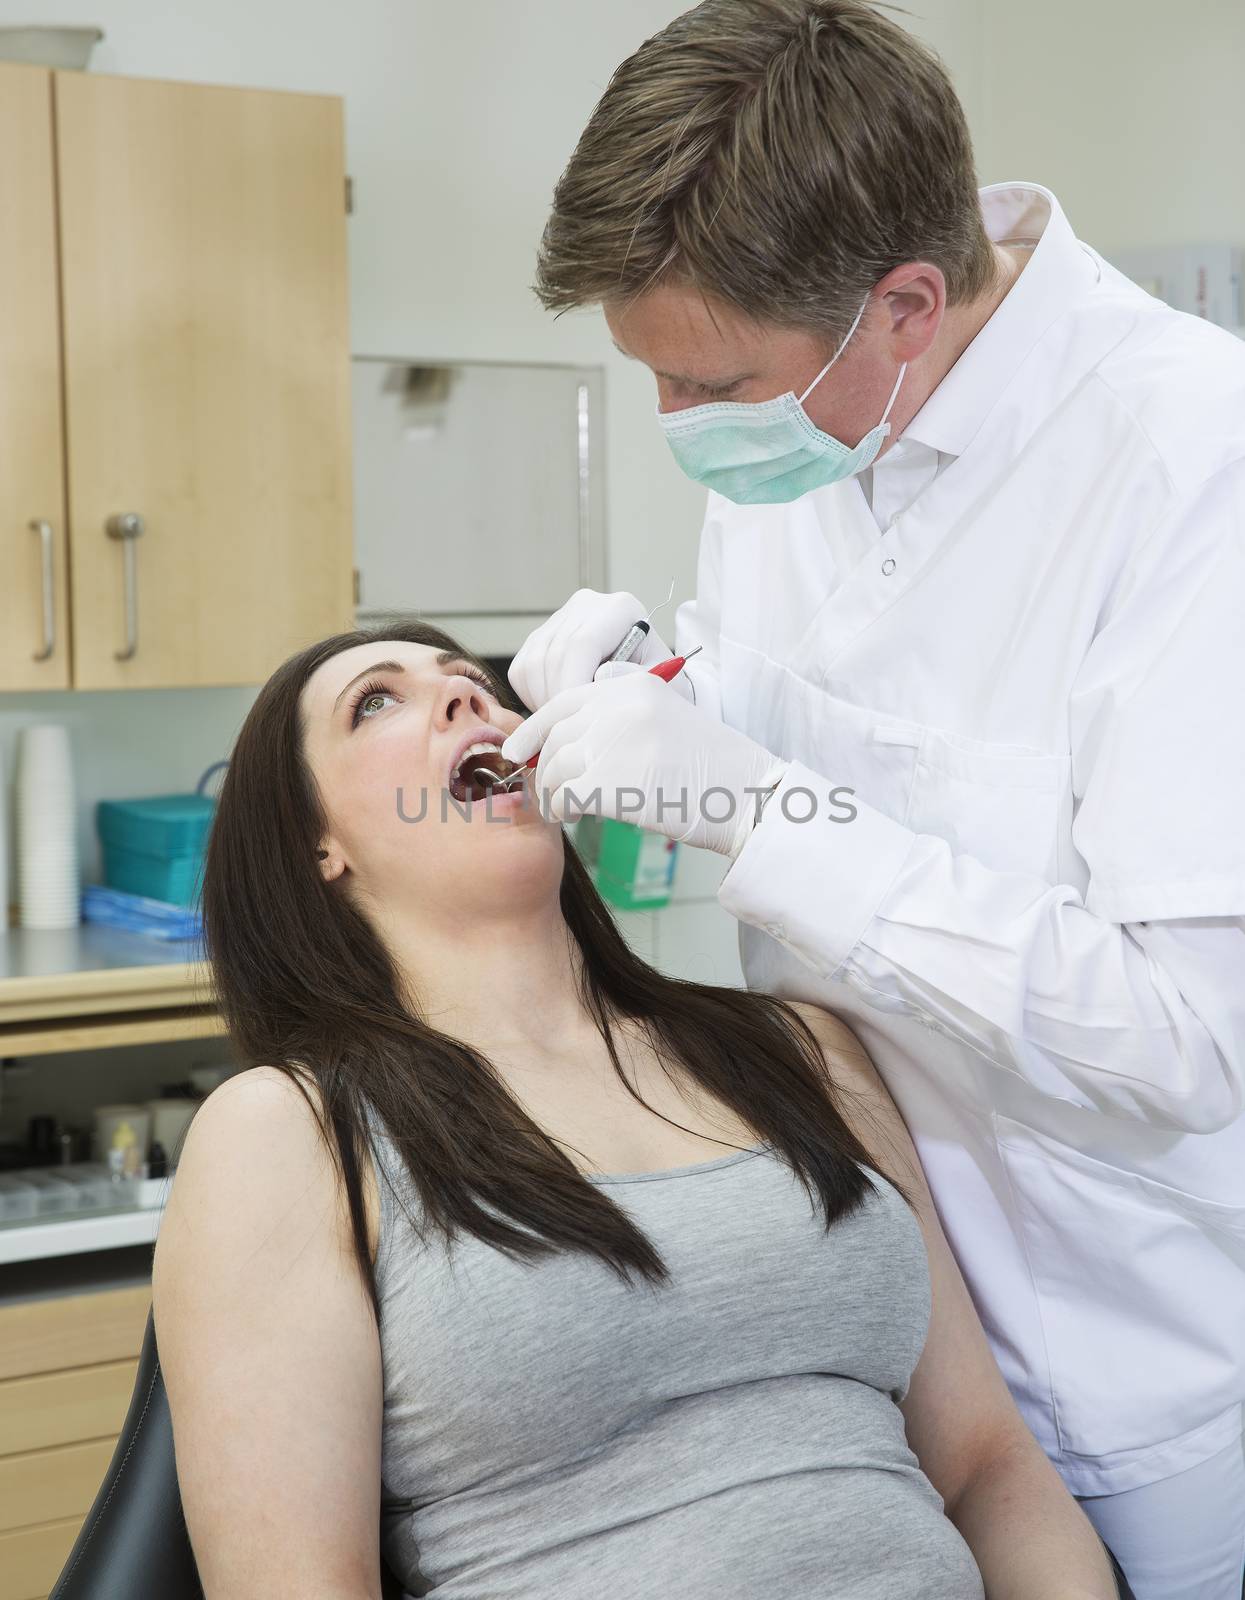 Dentist and Patient by gemenacom